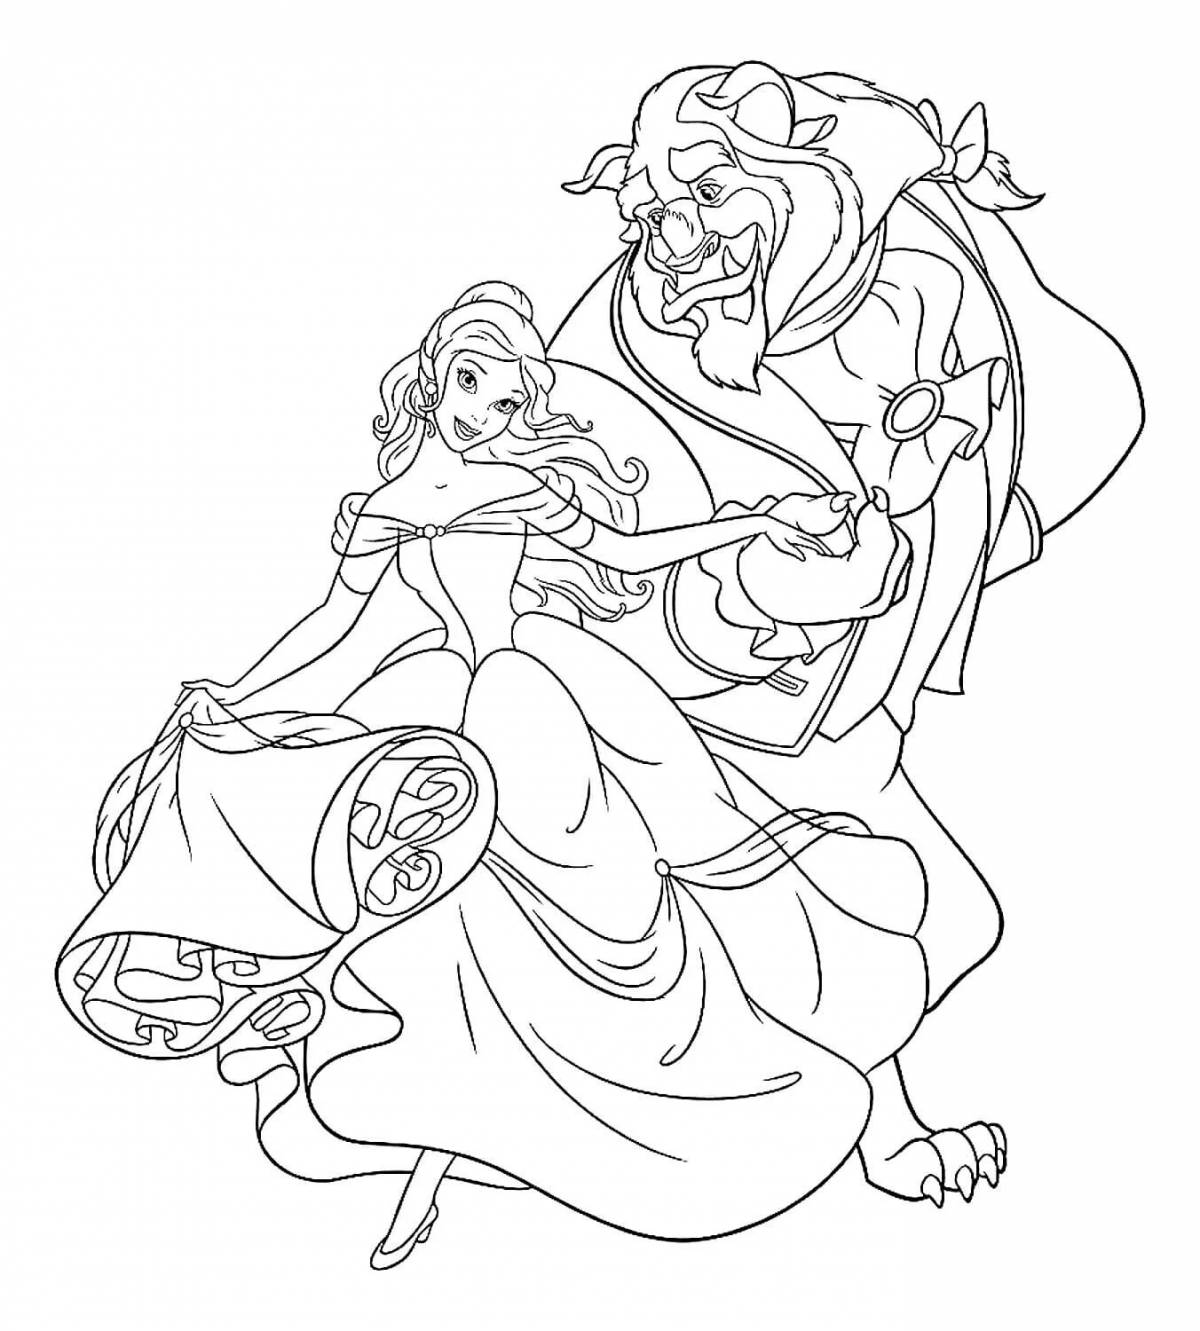 Mystical beauty and the beast coloring pages for kids